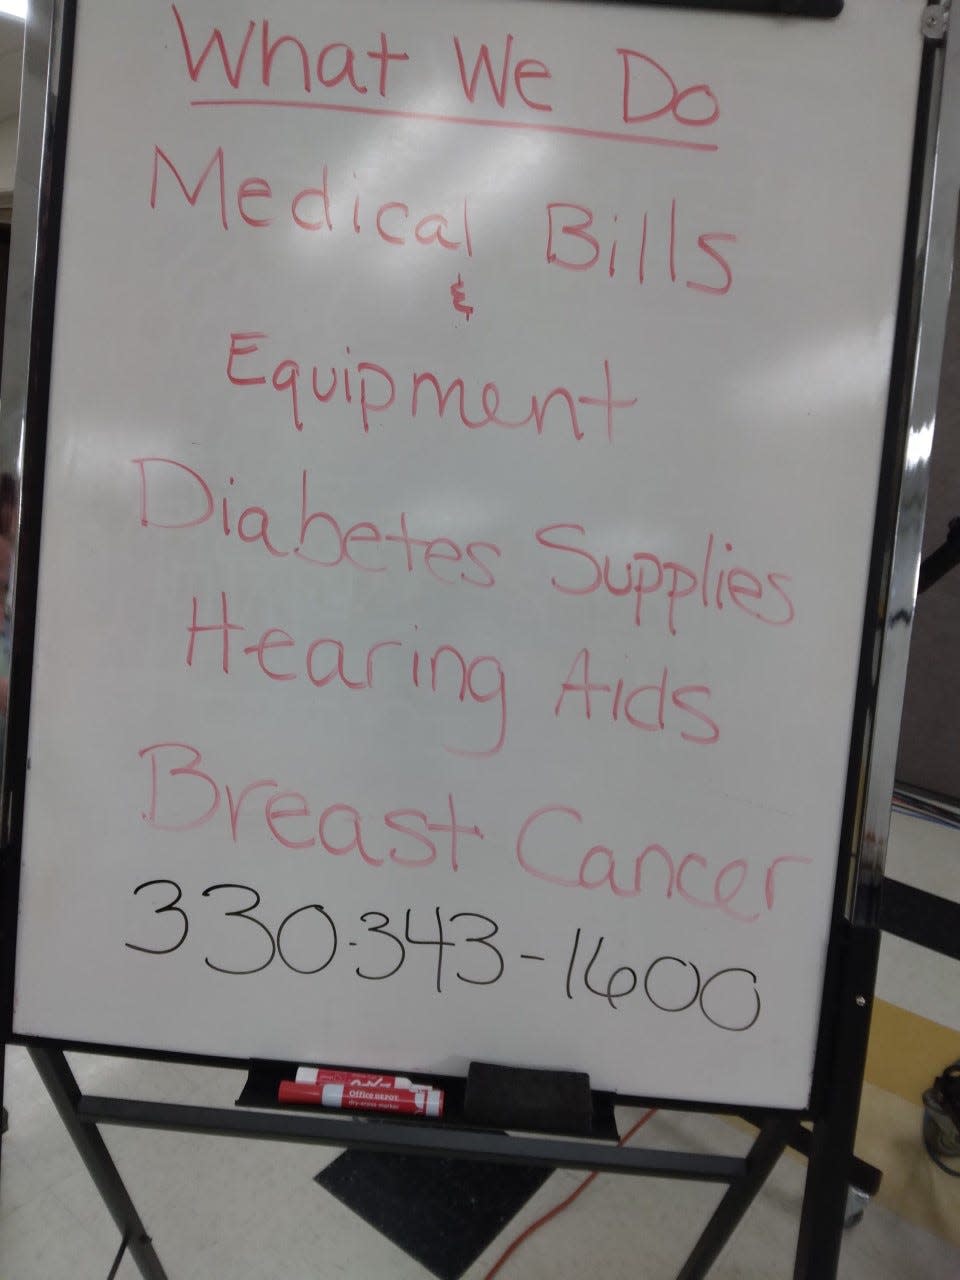 A cue card posted at the 50th annual Rainbow Connection Telethon lists some of the uses of the health charity's funds.